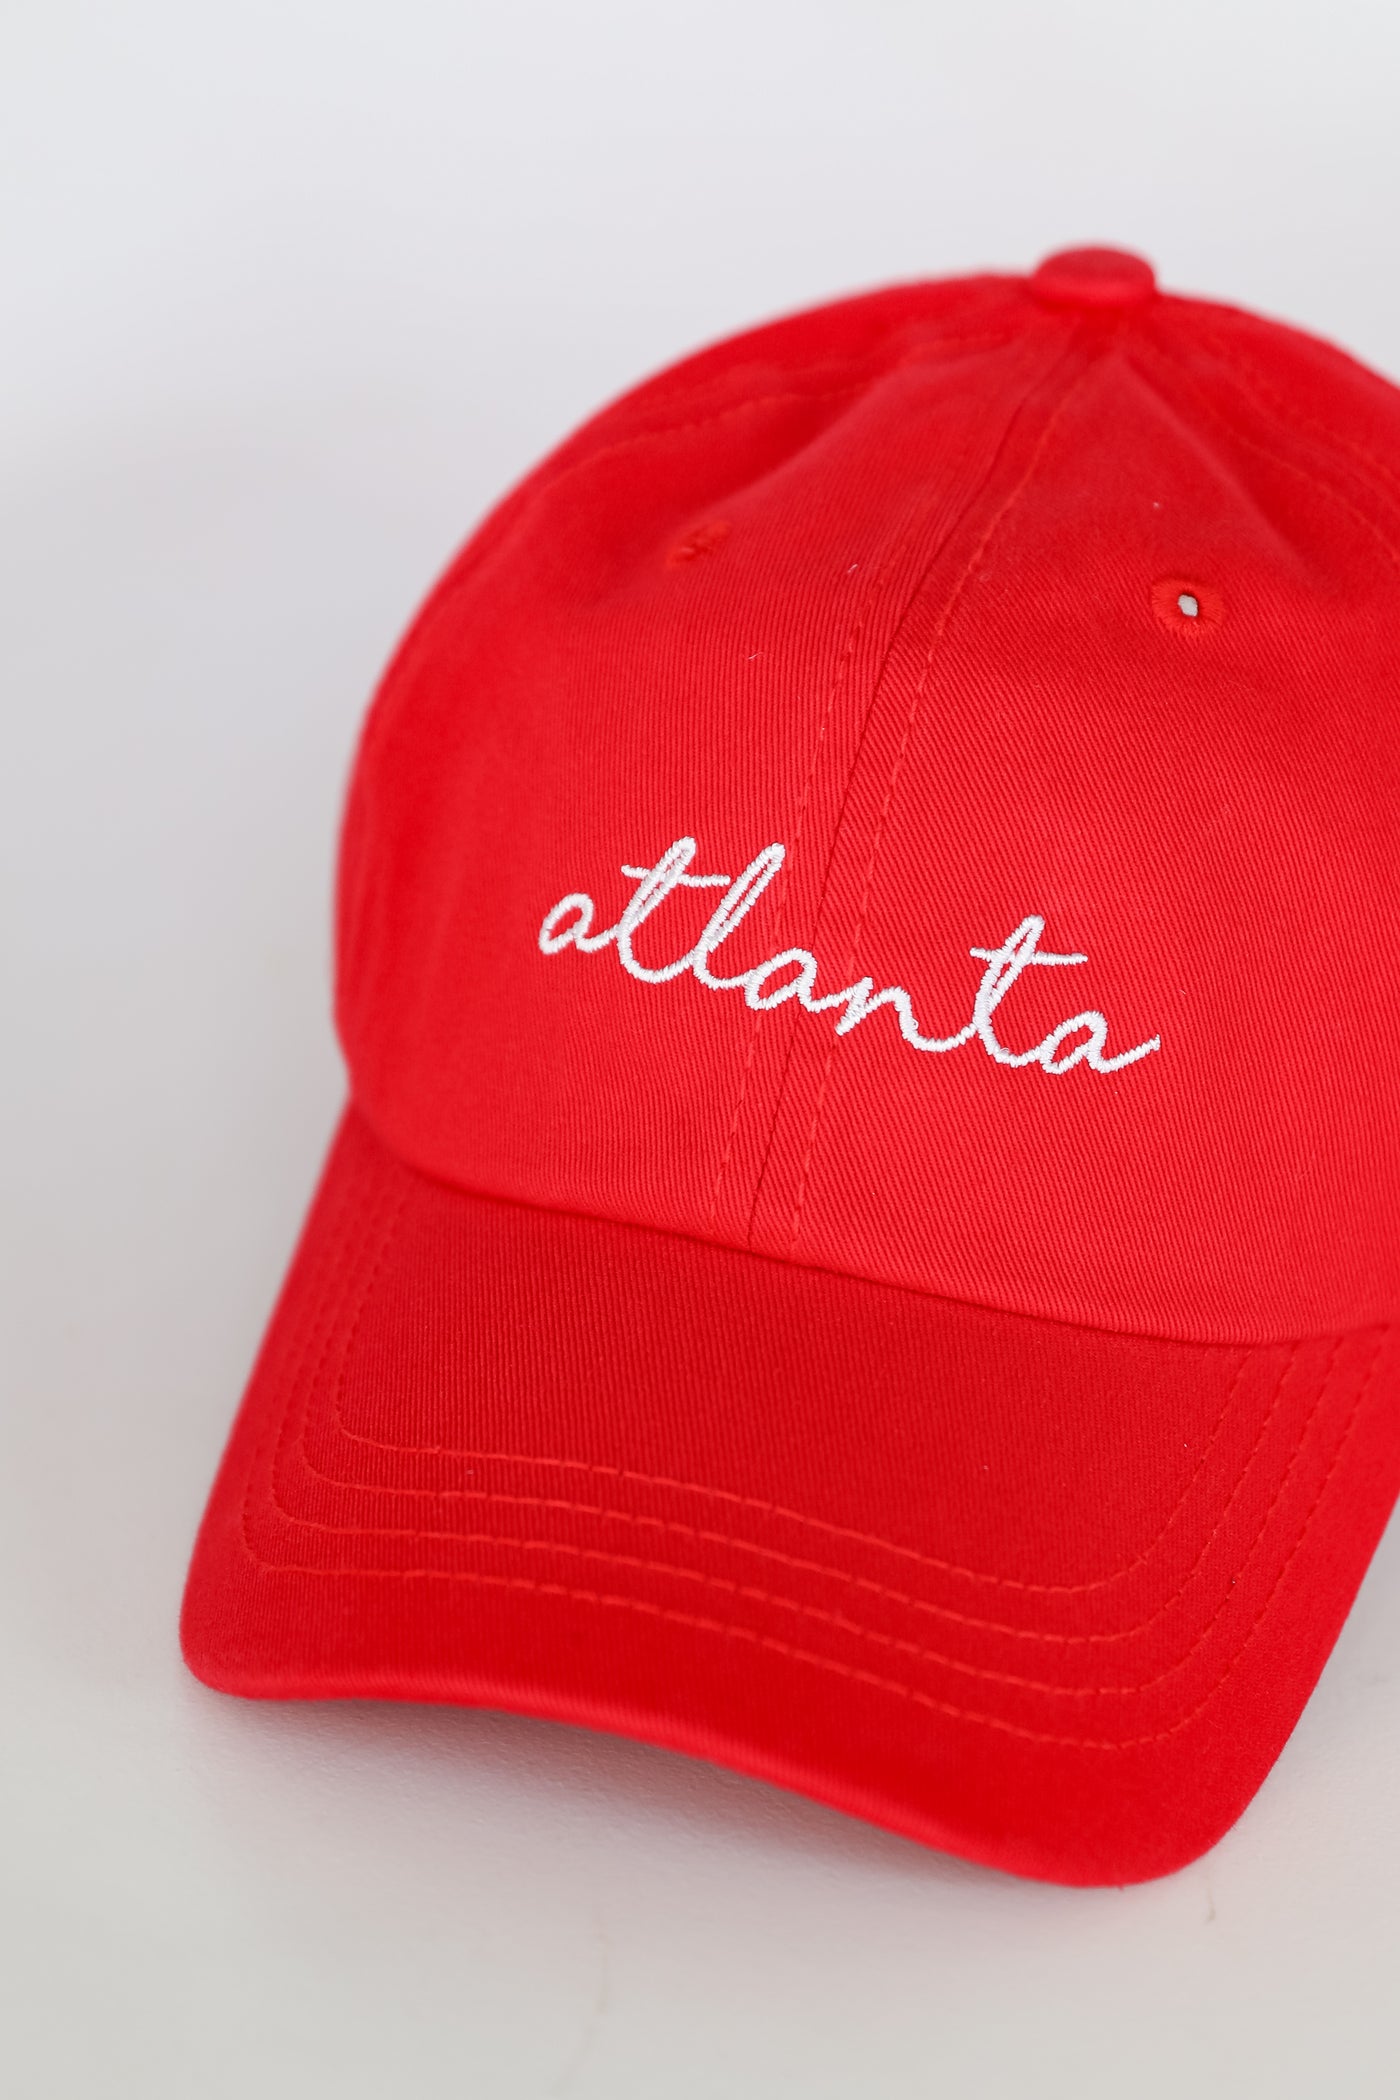 red Atlanta Script Embroidered Hat close up